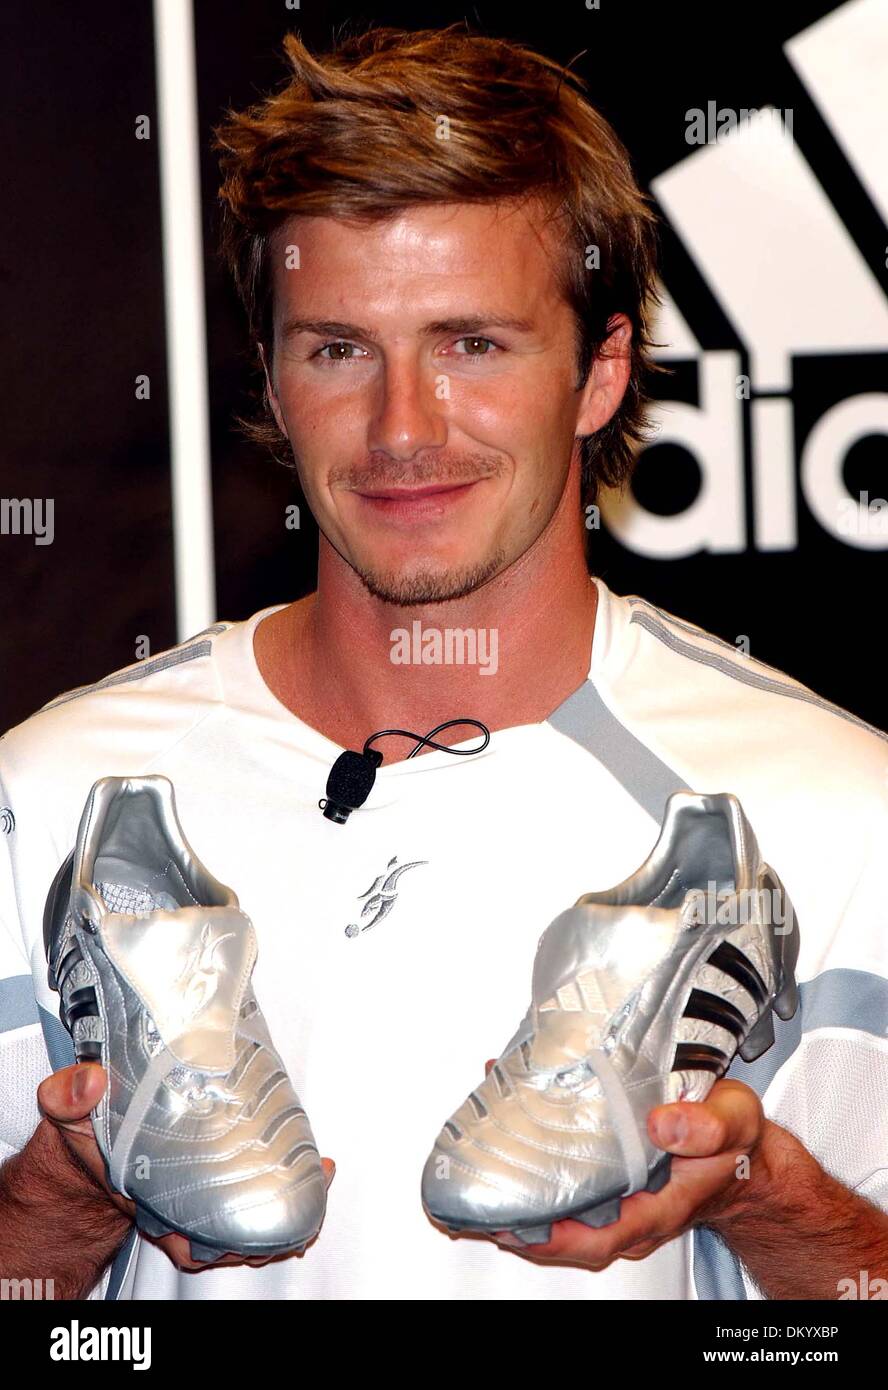 Oct. 21, 2001 - K43542AR.SOCCER SUPERSTAR DAVID BECKHAM AND ADIDAS TO  UNVEIL HIS NEW PREDATOR PULSE BOOT AND PREDATOR PRODUCT LINE. ADIDAS SPORT  PERFORMANCE STORE, NEW YORK CITY. 06-01-2005. ANDREA RENAULT-(Credit Image:  ©